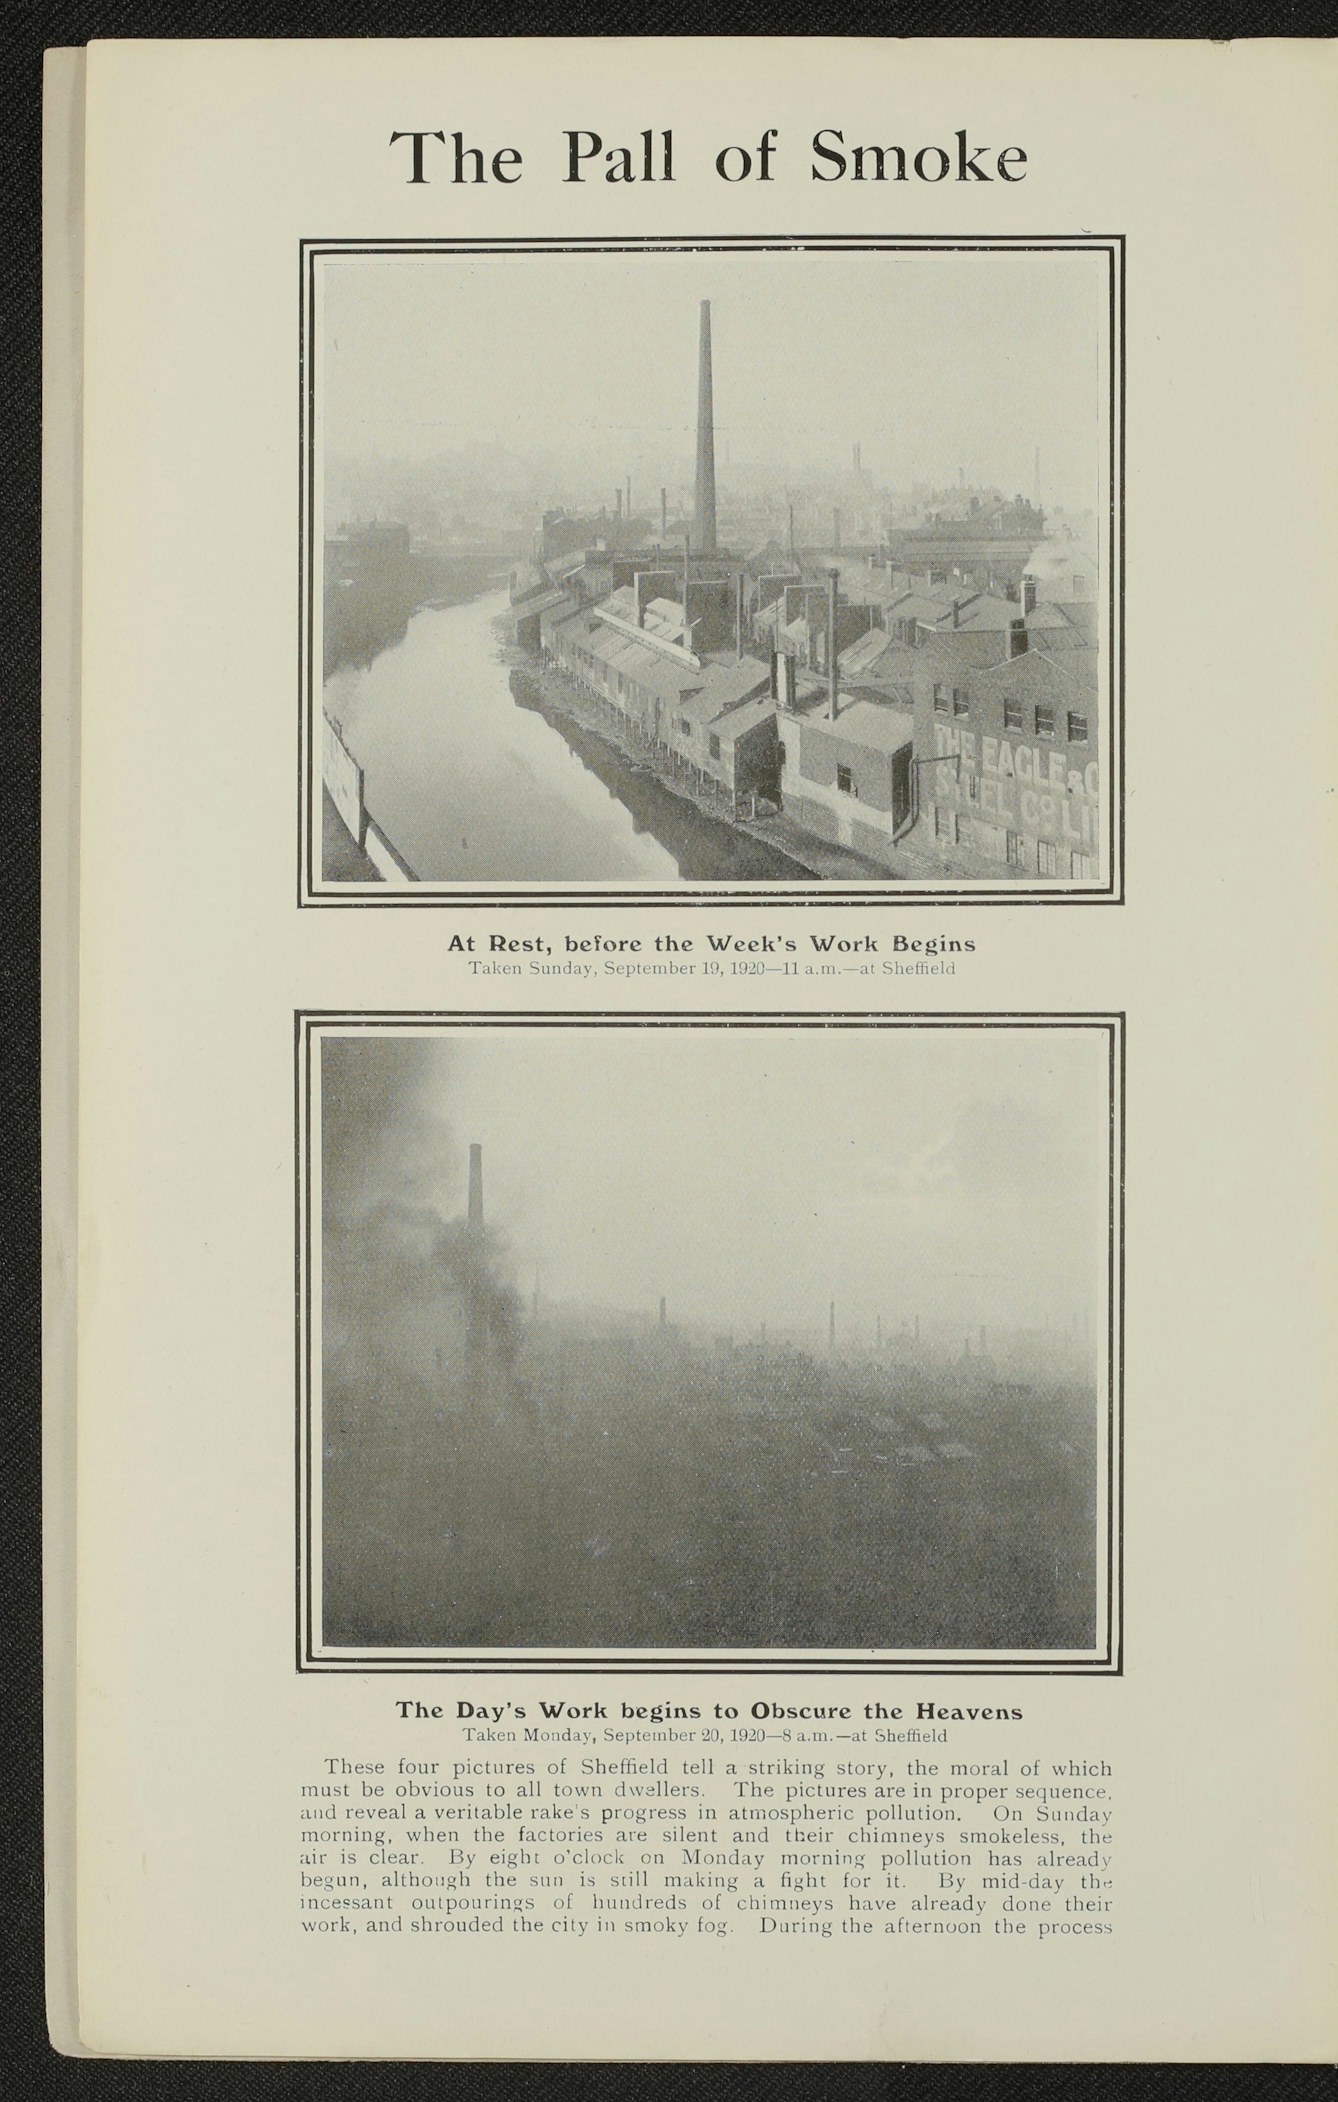 Photograph of a book page titled The Pall of Smoke with two images. The top image shows a view of the city, with the river, houses and factories and it is captioned "At Rest, before the Week's Work Begins". Below this is an image captioned "The Day's Work begins to Obscure the Heavens" and the picture is mostly grey smoke with a few chimneystacks just discernable. 